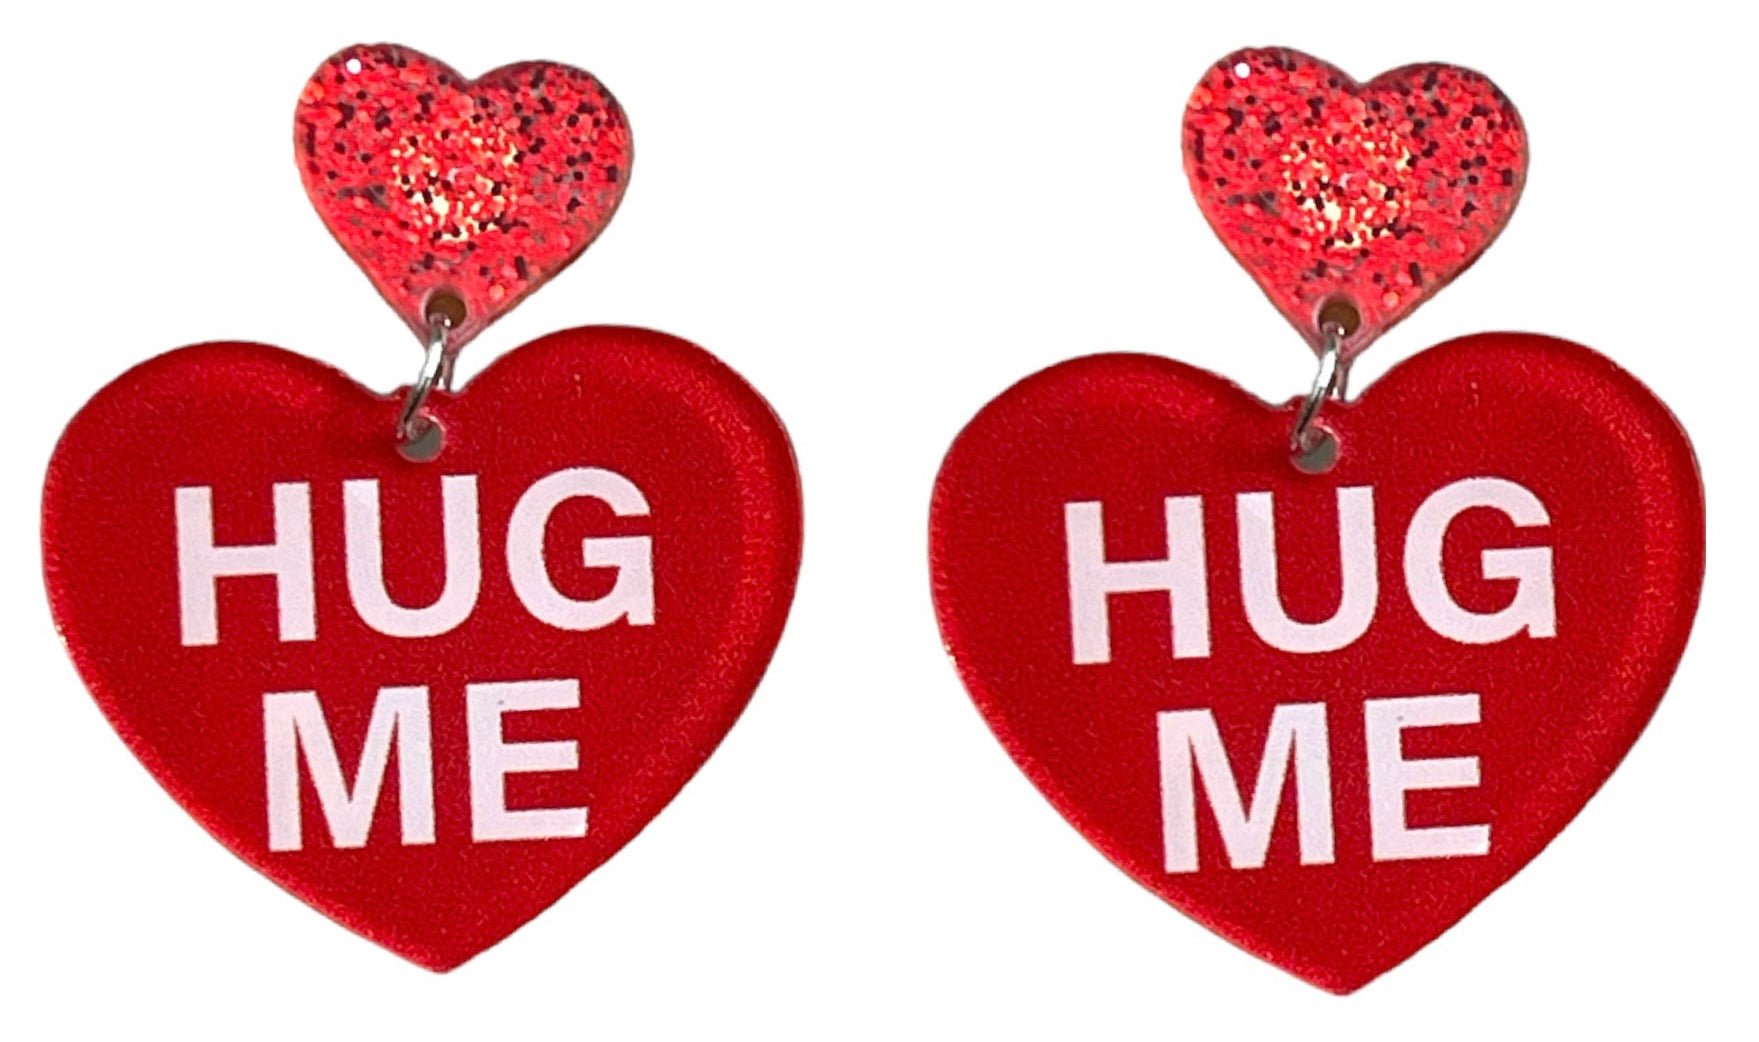 Hug Me Valentine Sweet Hearts Candy Colorful Heart Earrings - Relic828